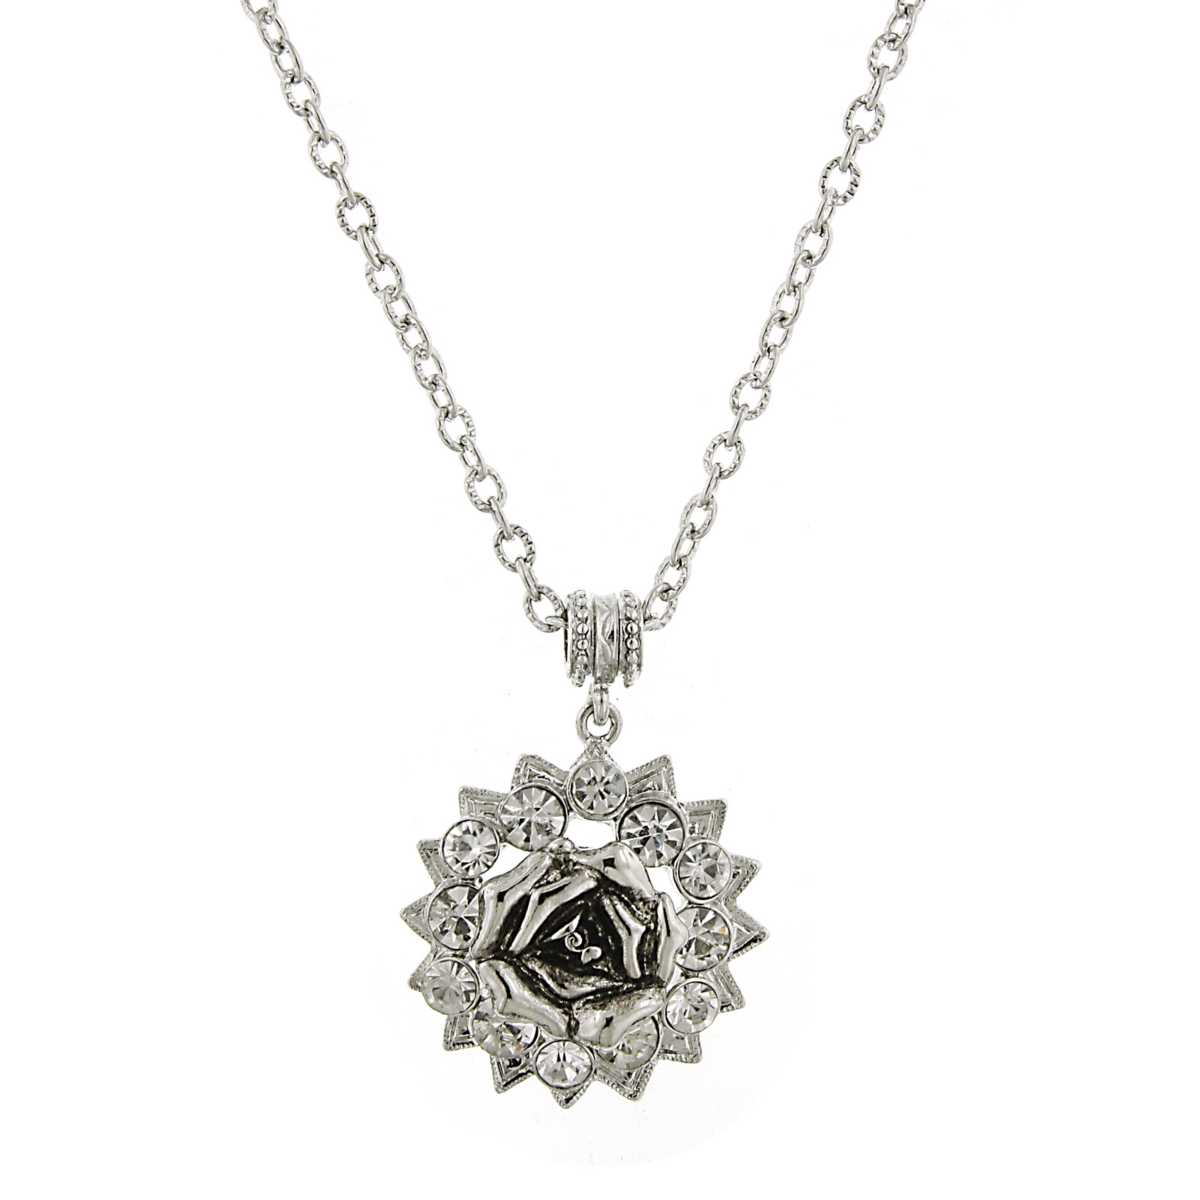 Silver-Tone Crystal Flower Pendant Necklace 16" Adjustable - Silver